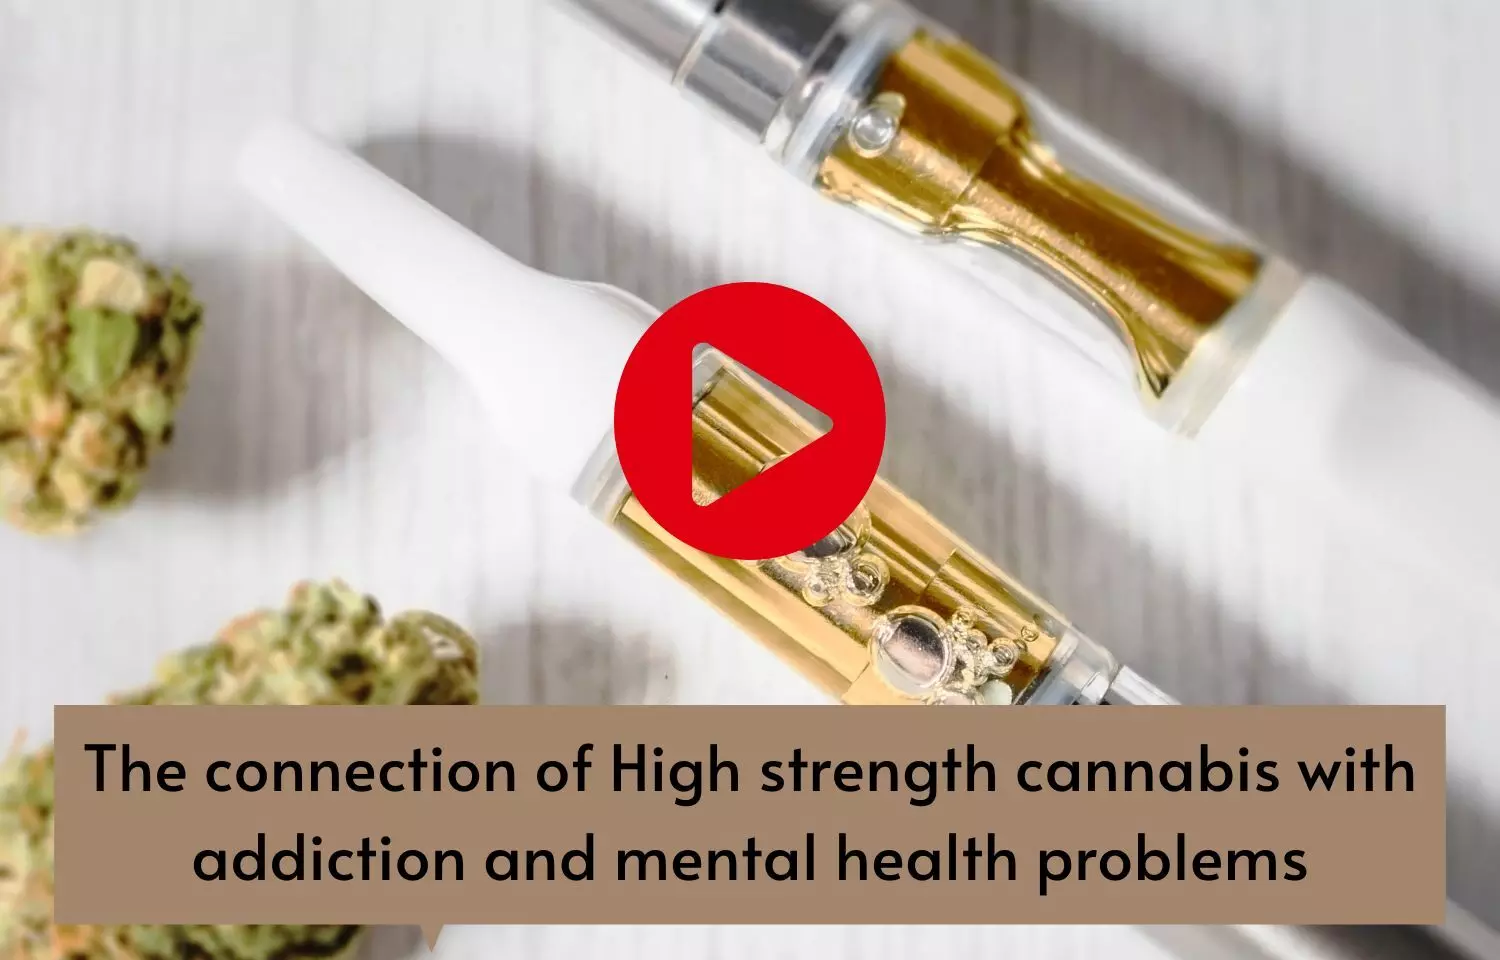 The connection of High strength cannabis with addiction and mental health problems